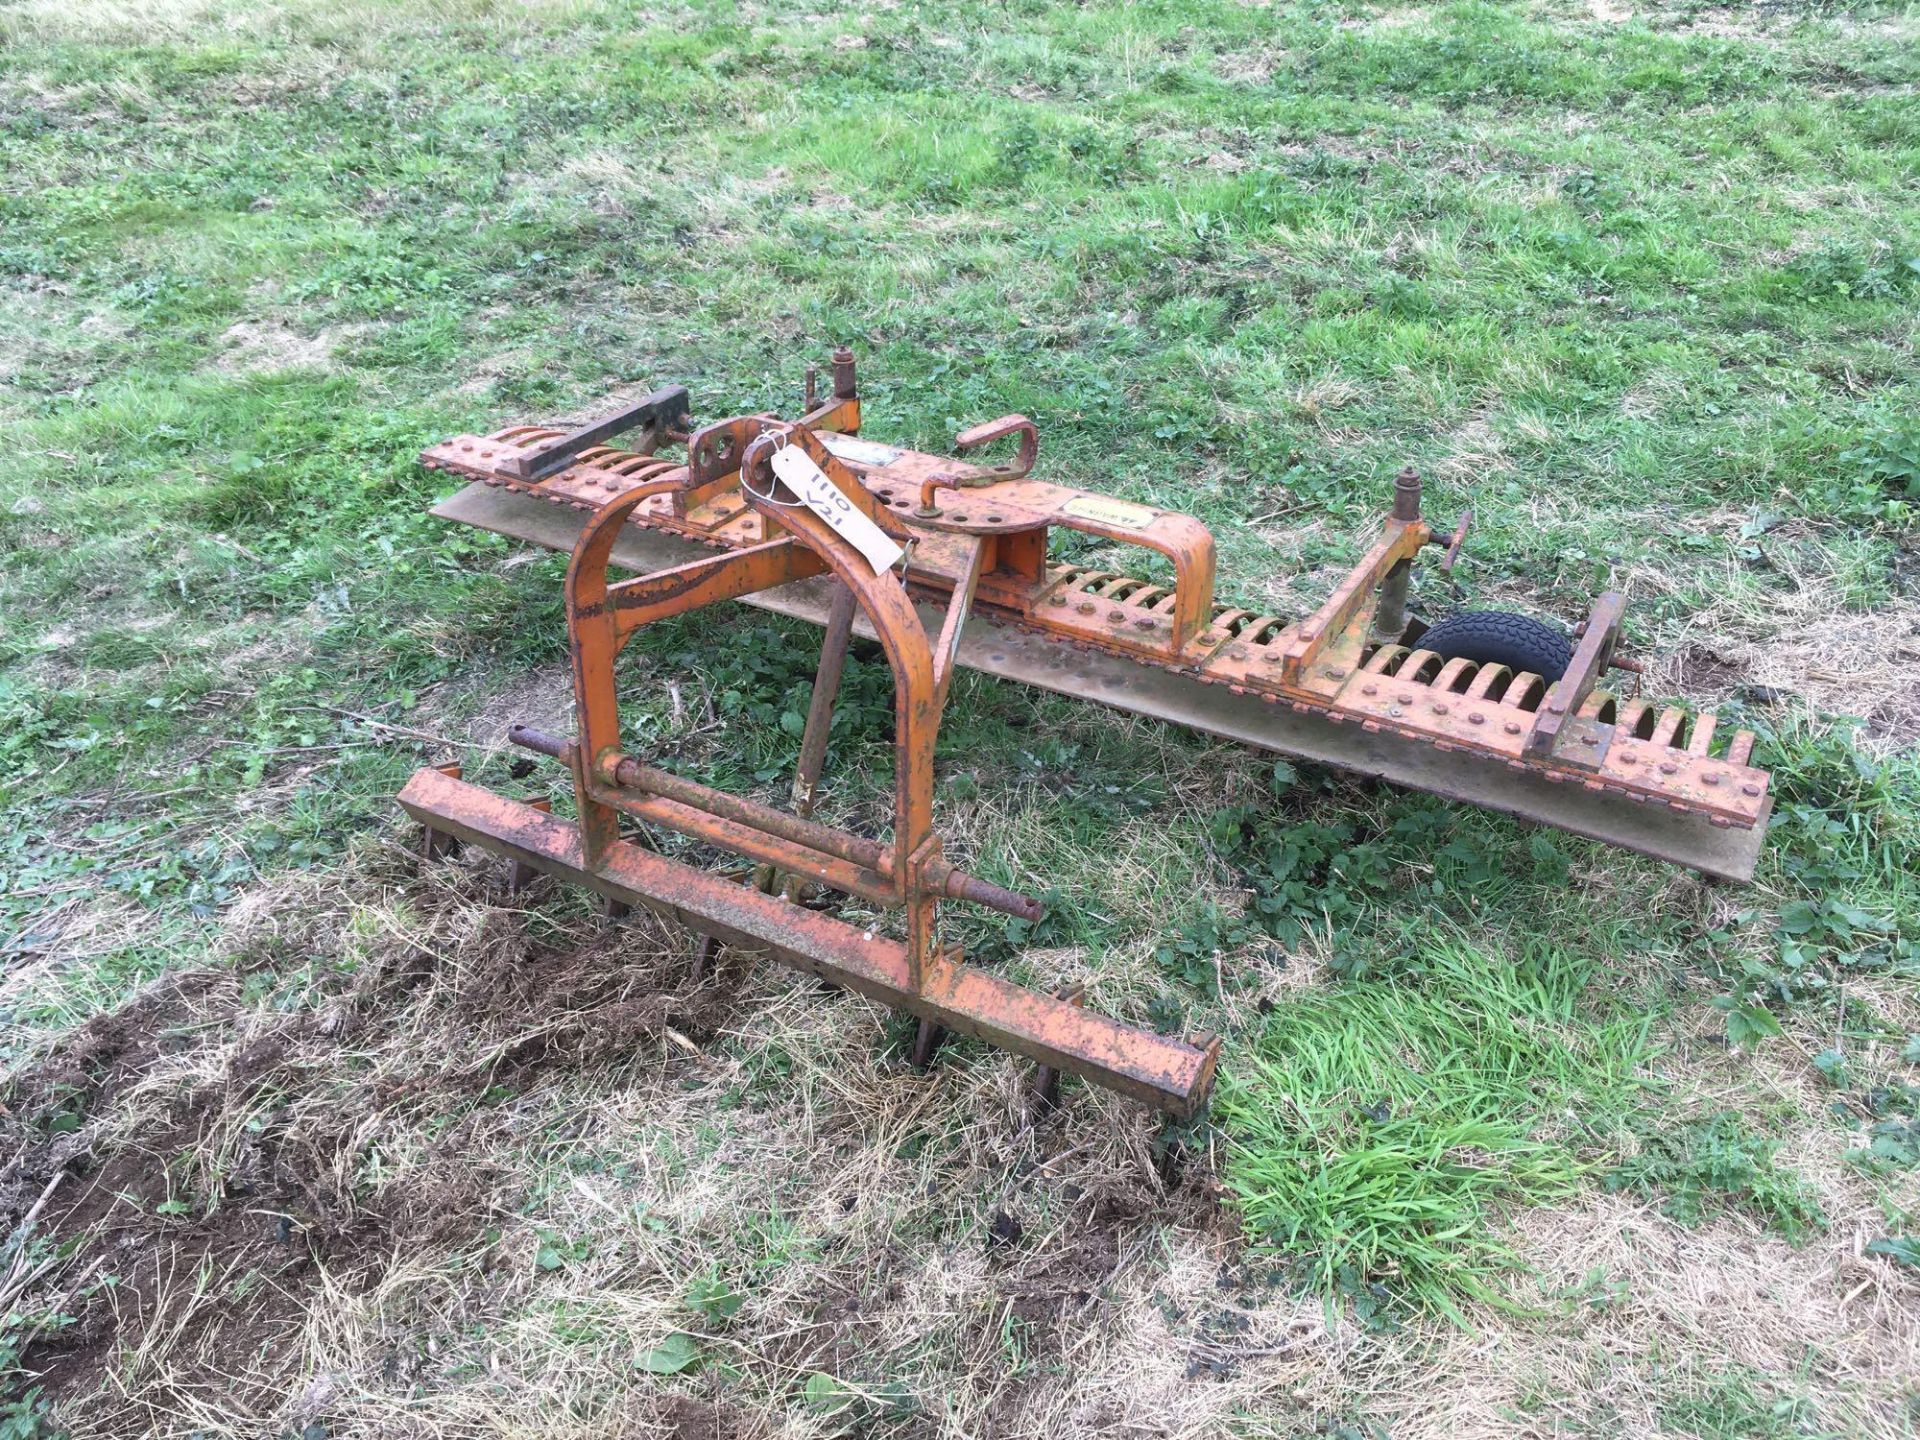 York rake for compact tractor 6' width, c/w optional grader bar & scarifying teeth (1 missing). - Image 2 of 5